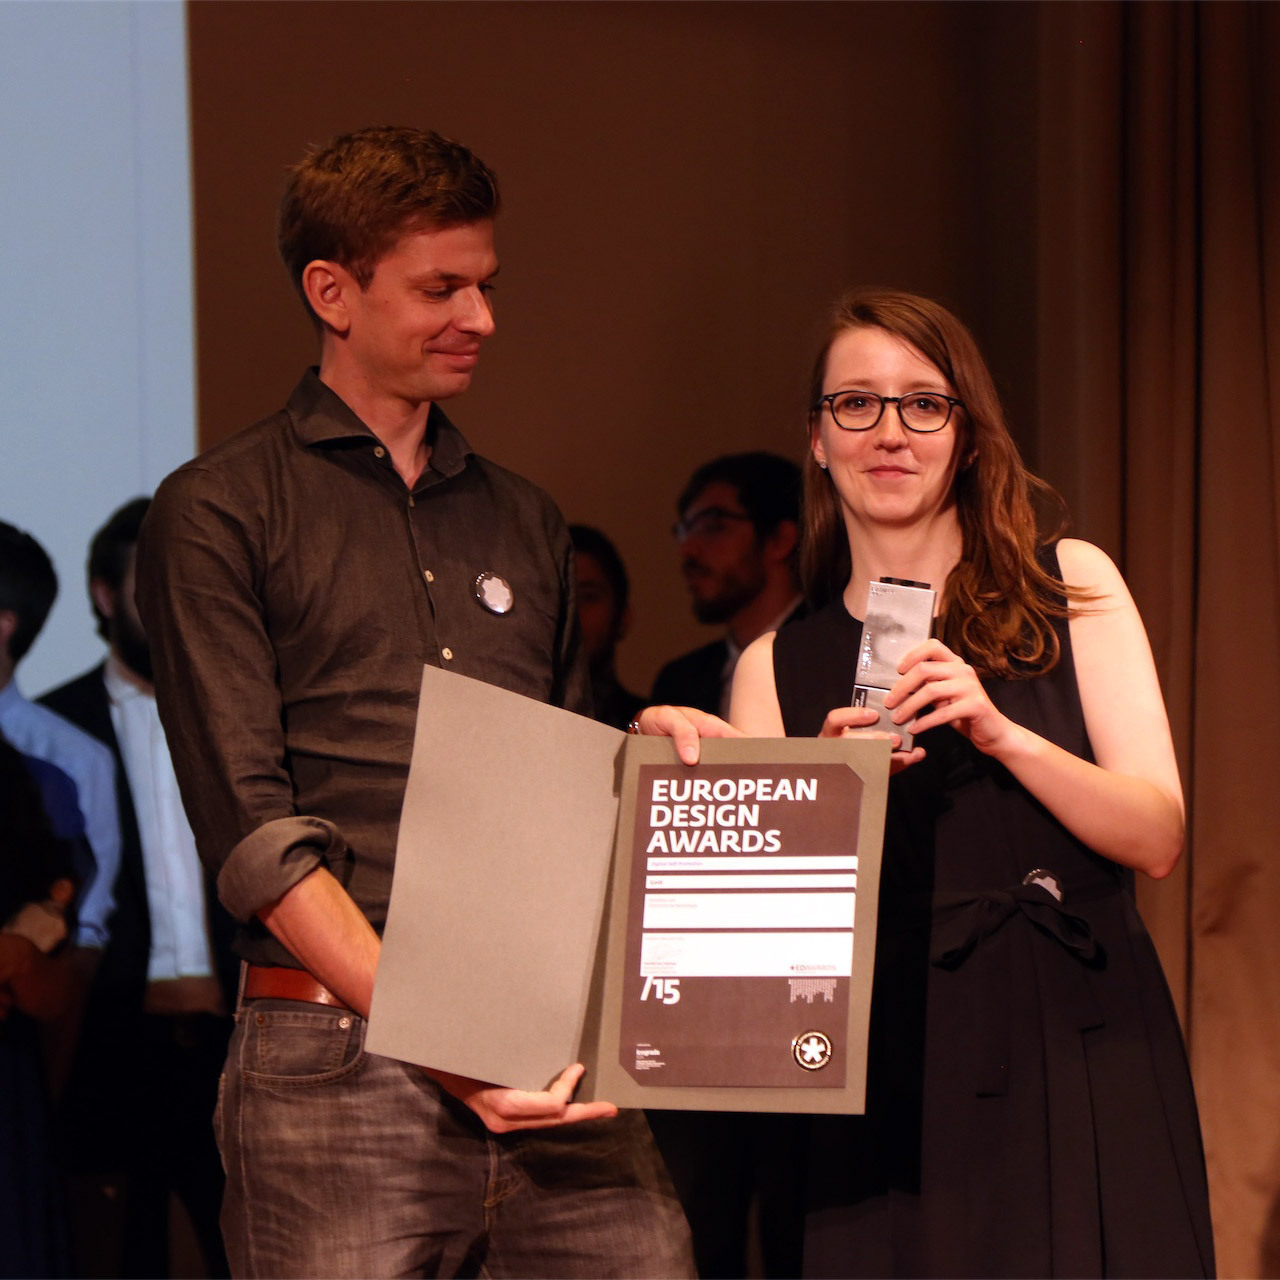 Jörg Haubrichs, Senior Internet Software Developer and Manager Web Development, and Jana Kühl, UI/UX Designer, with the Gold Award and certificate at the European Design Awards ceremony in Istanbul, Turkey on Saturday, 23 May 2015.
